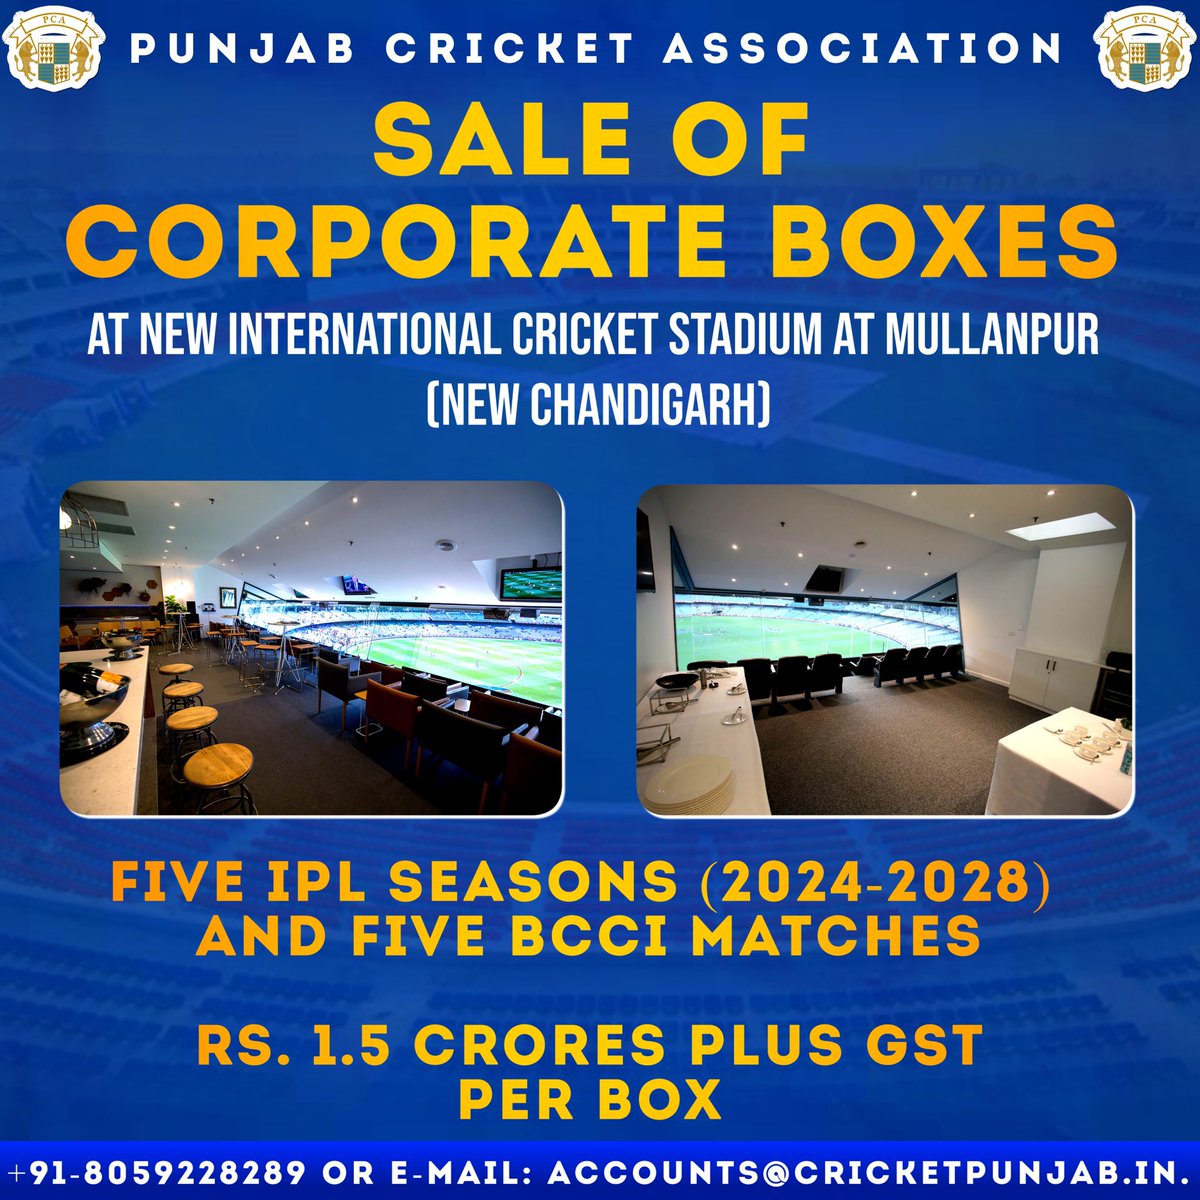 SALE OF CORPORATE BOXES AT NEW INTERNATIONAL CRICKET STADIUM AT MULLANPUR (NEW CHANDIGARH) FIVE IPL SEASONS (2024-2028) AND FIVE BCCI MATCHES Rs. 1.5 Crores plus GST Per Box. +91-8059228289 or E-mail: accounts @cricketpunjab.in @dilsherkhanna